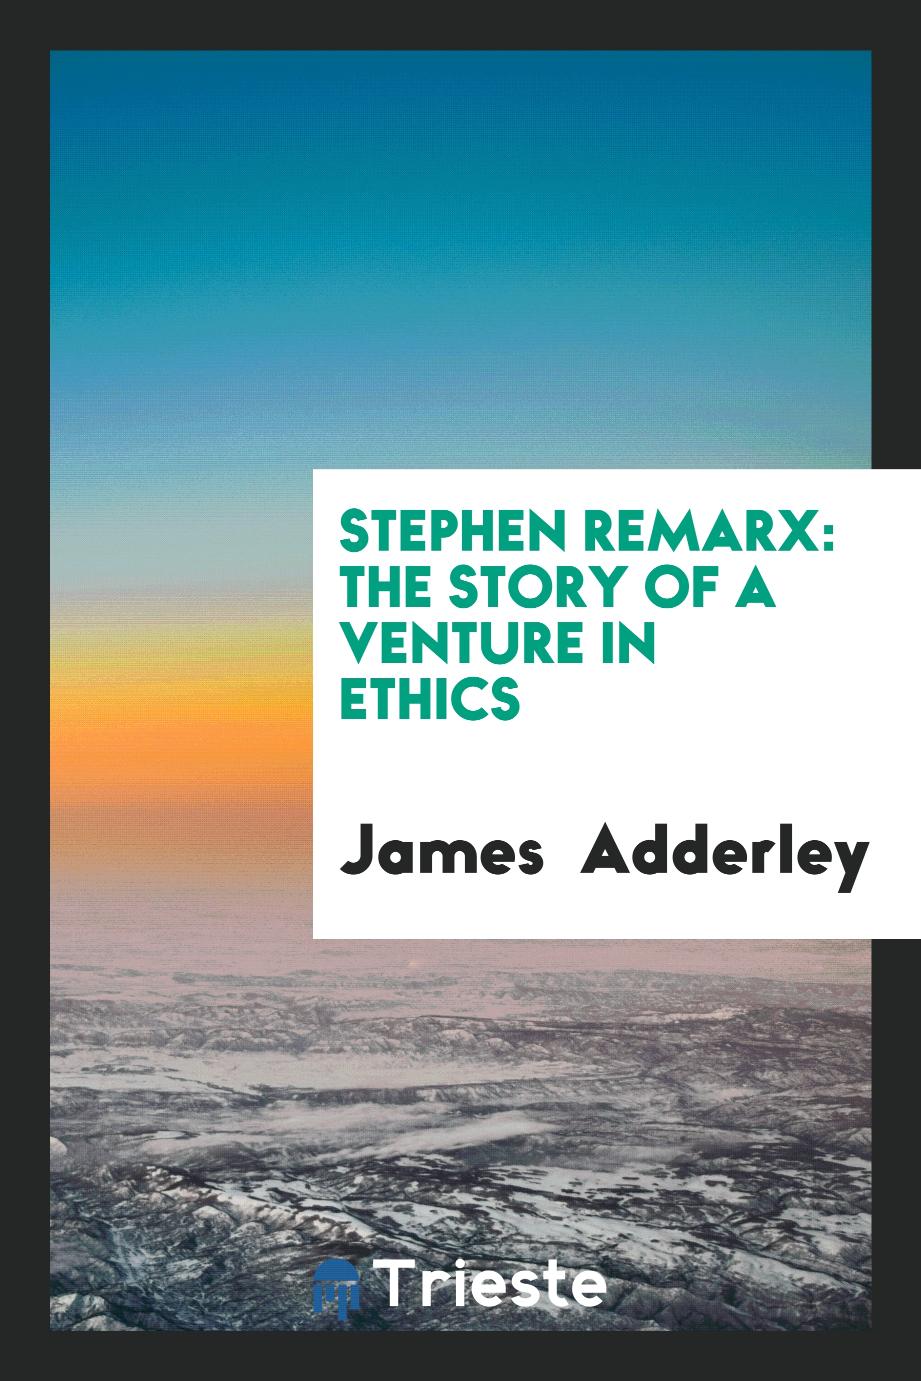 Stephen Remarx: The Story of a Venture in Ethics